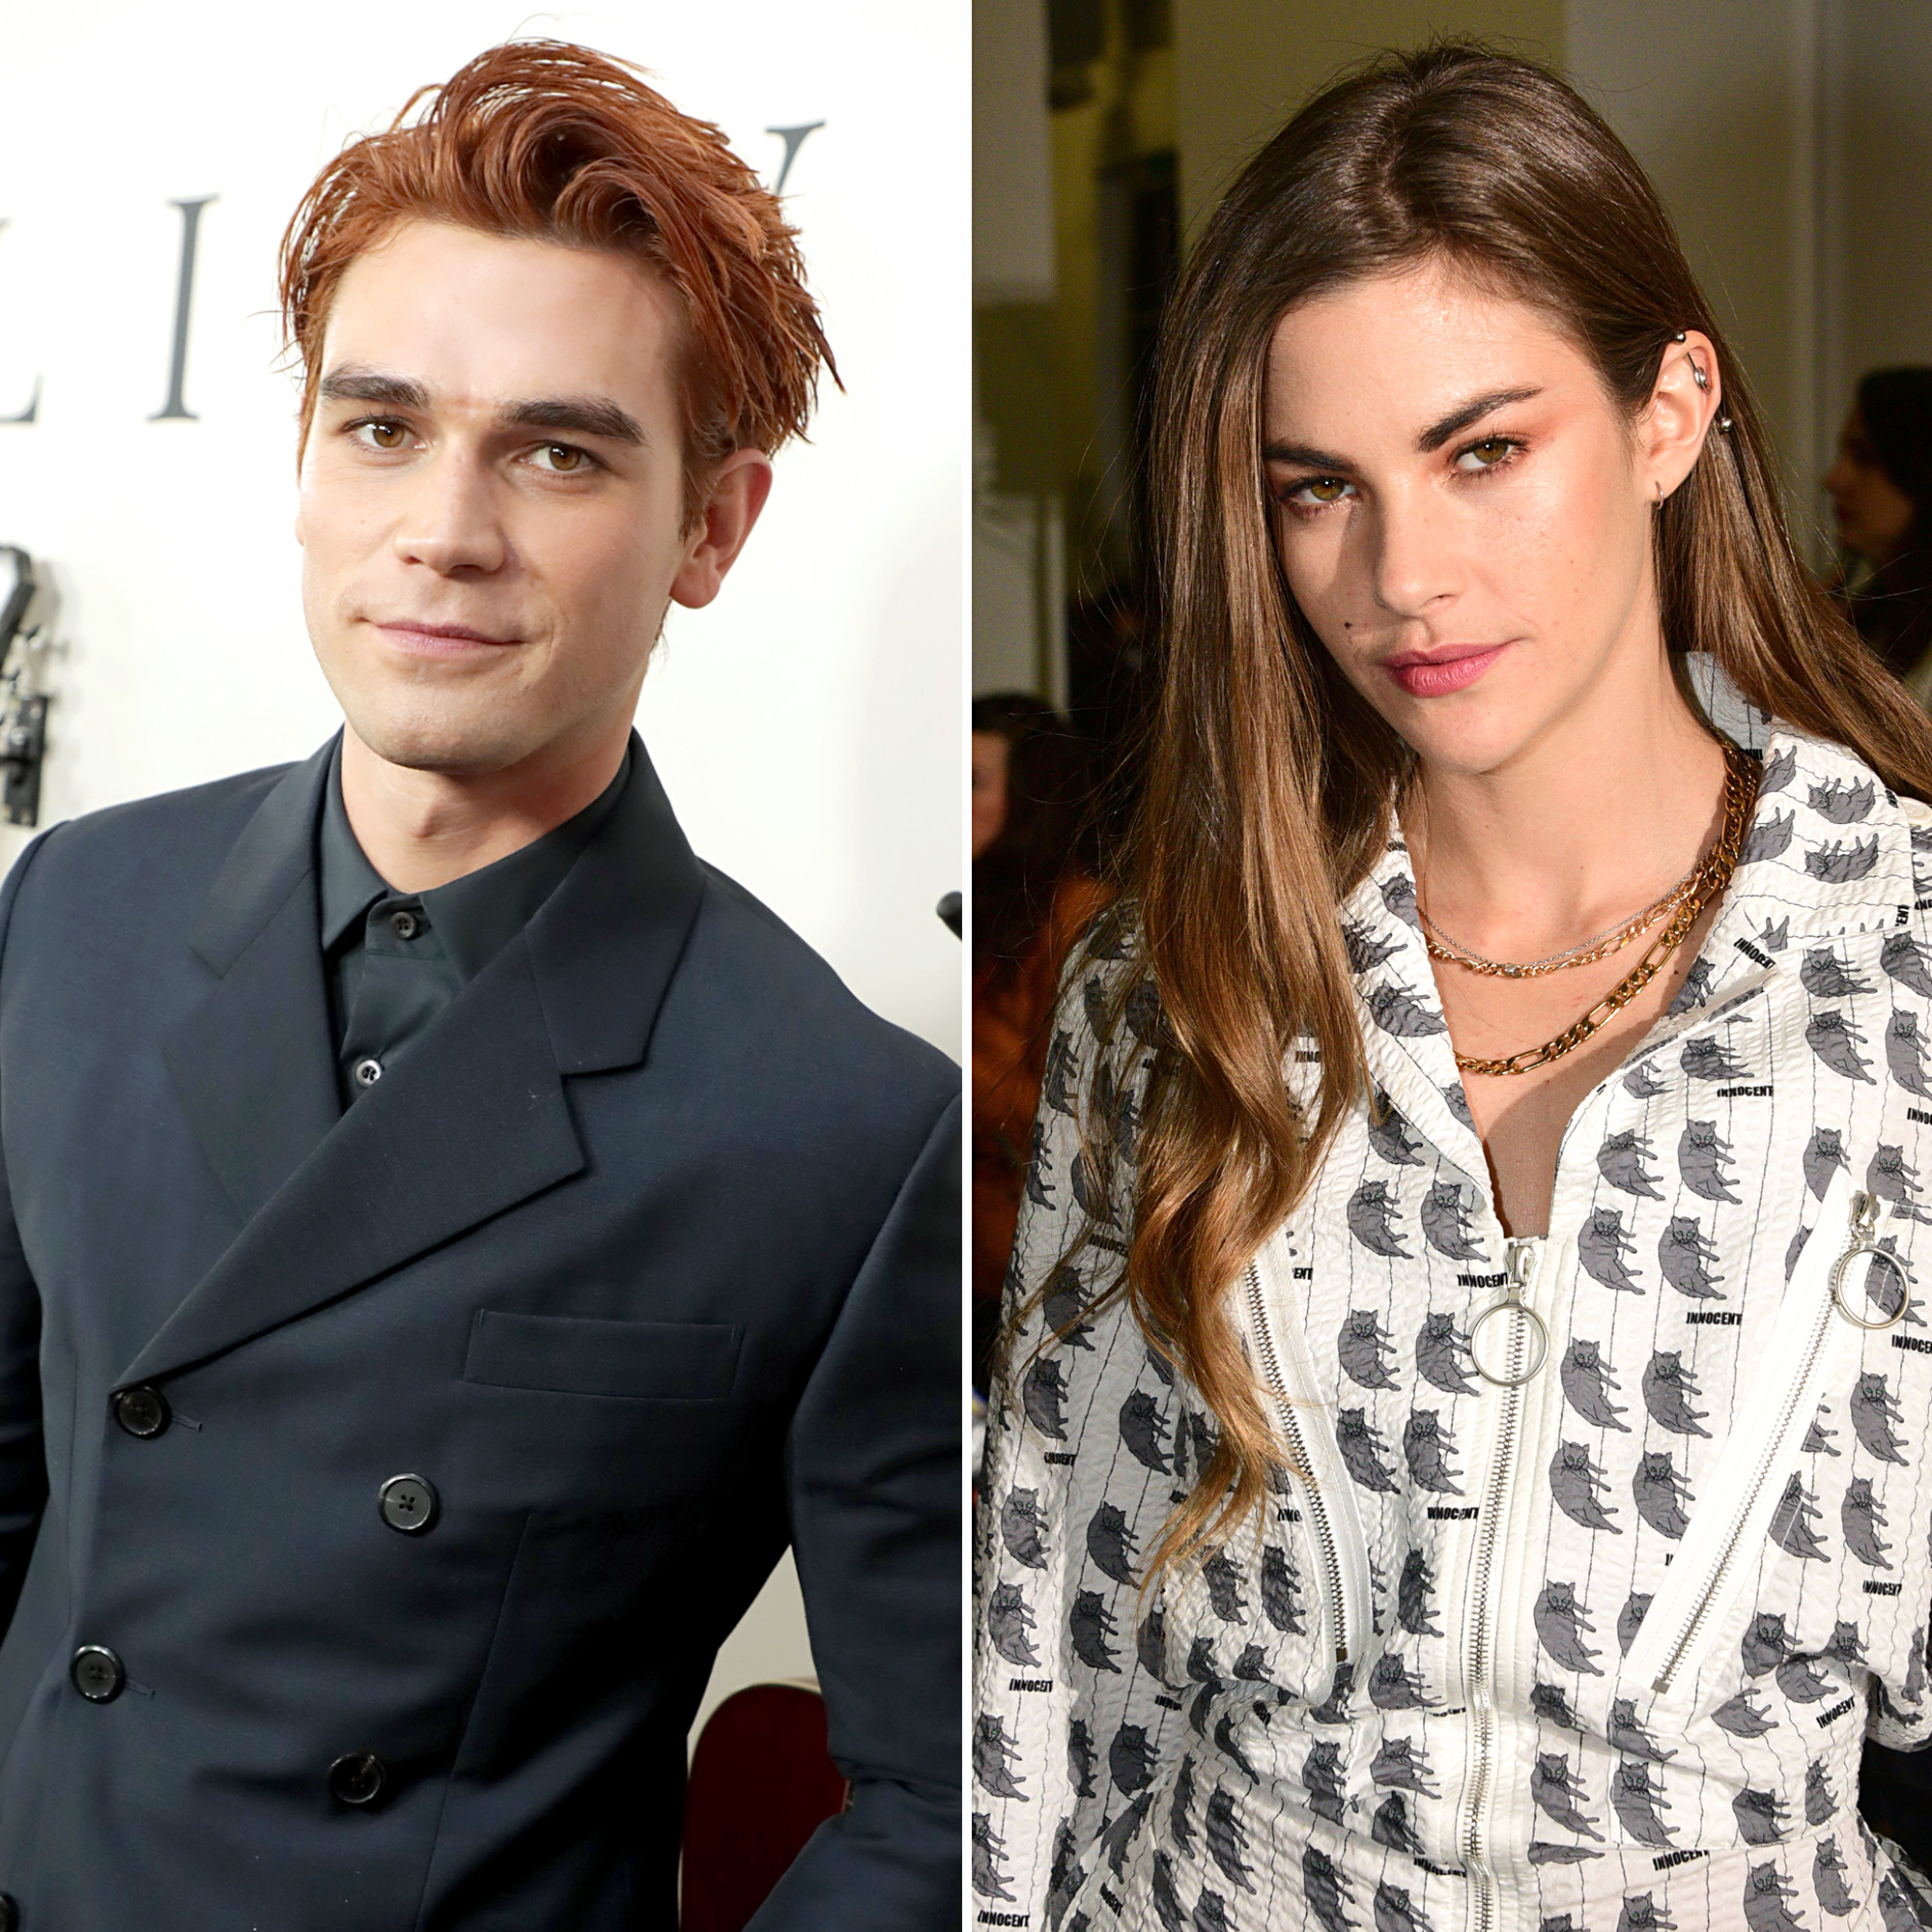 Nudist Group Couples - KJ Apa Takes Nude Photos of Clara Berry, She Declares Love for Him